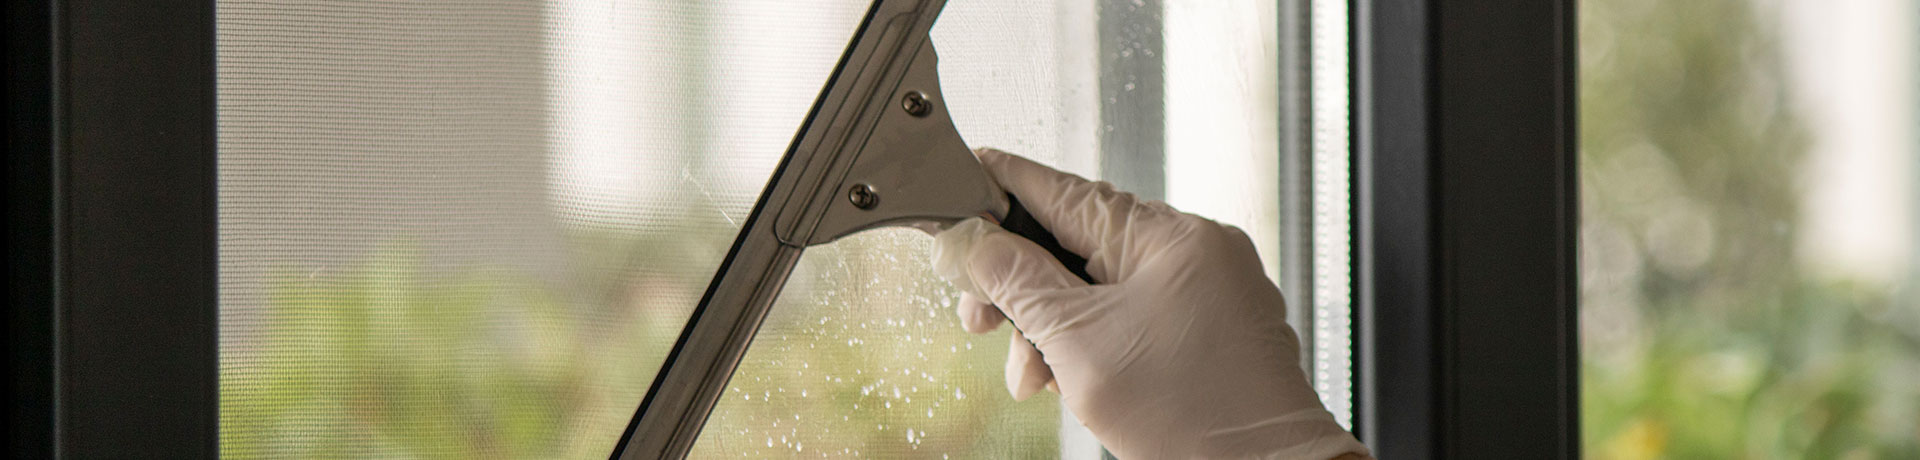 ServiceMaster Clean professional performing an exterior office window cleaning service